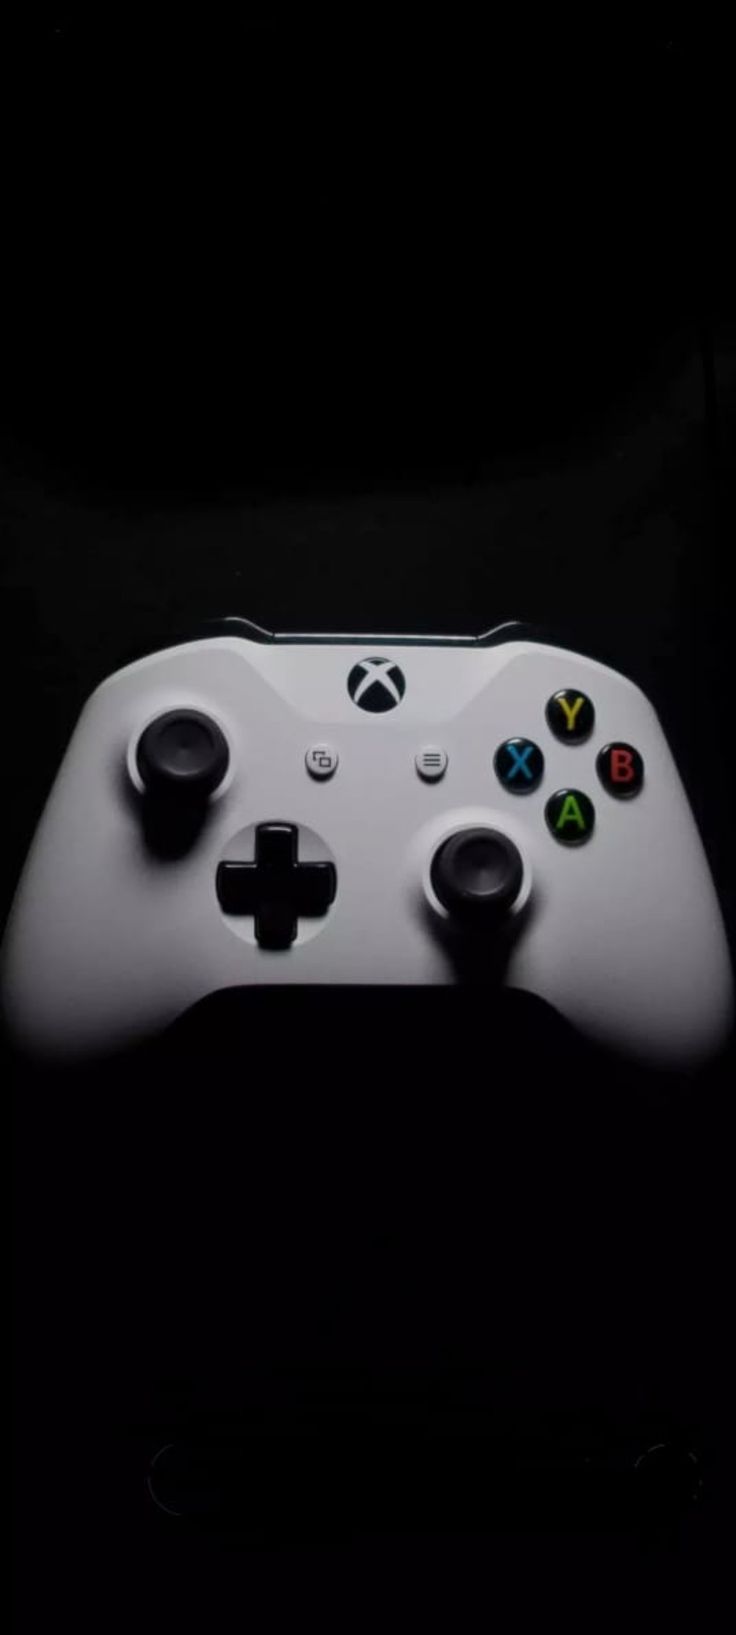 White Xbox controller. Xbox controller, Gaming products, Game console